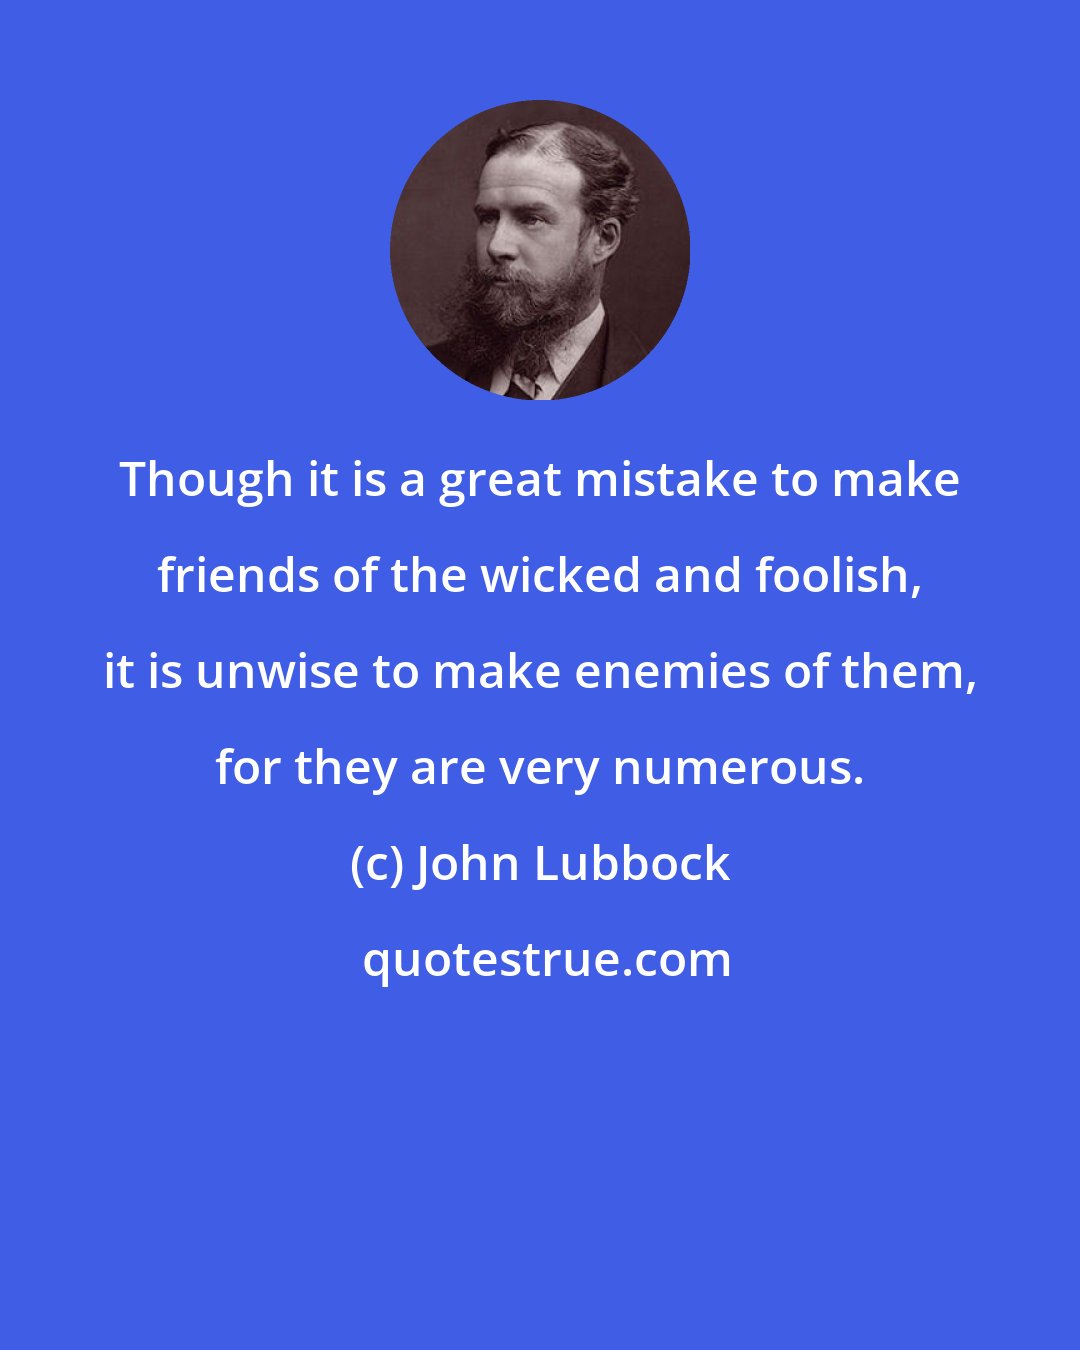 John Lubbock: Though it is a great mistake to make friends of the wicked and foolish, it is unwise to make enemies of them, for they are very numerous.